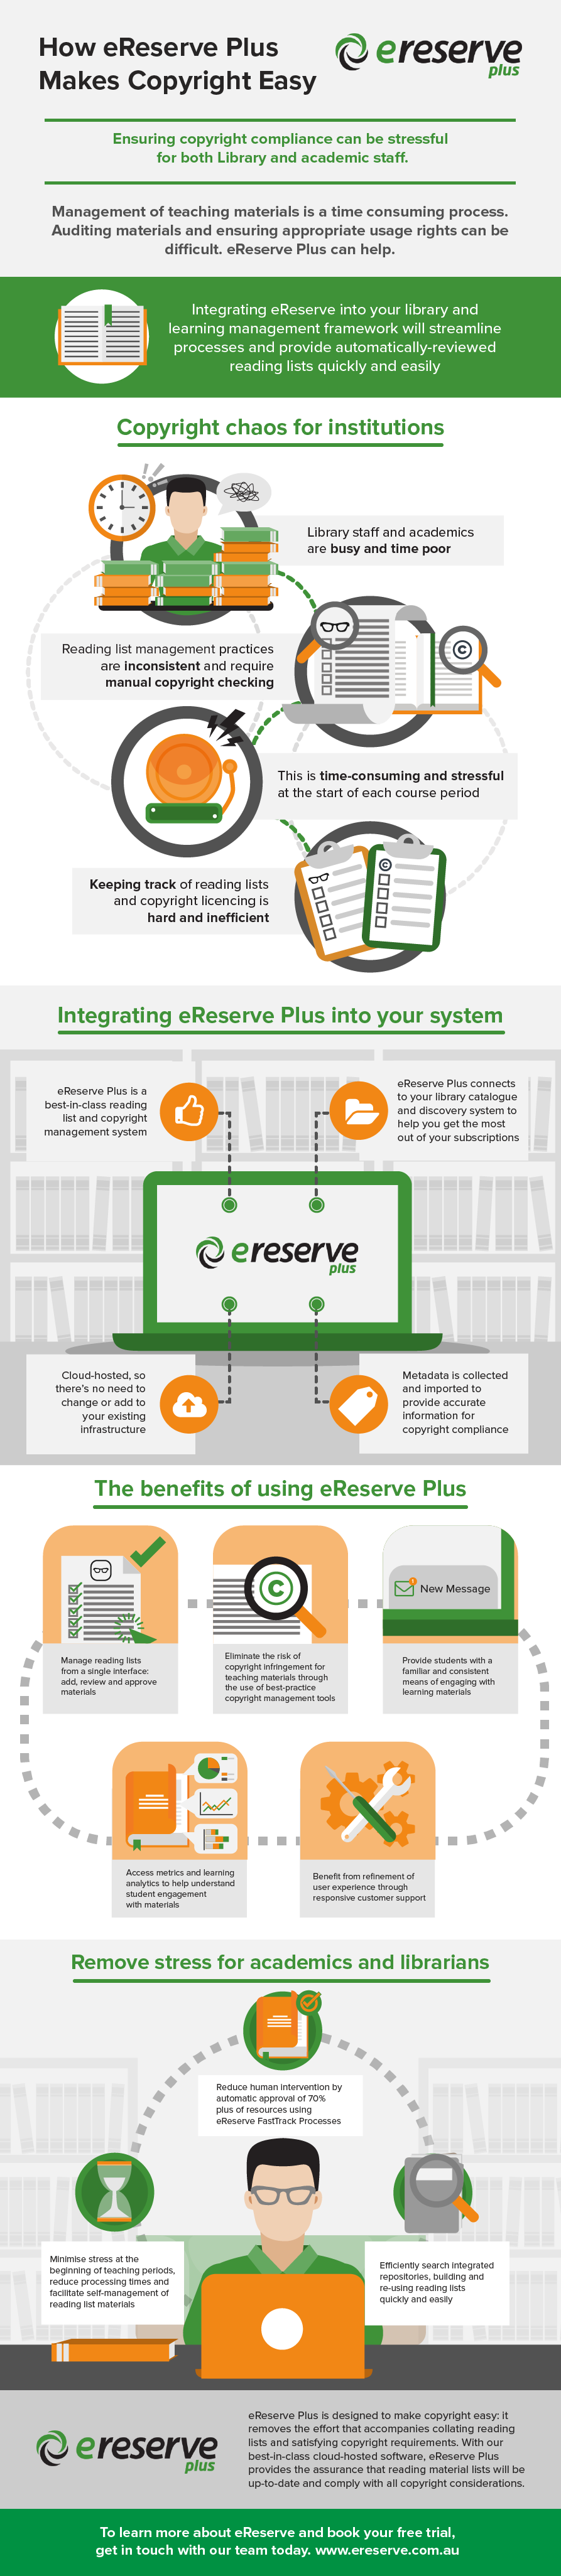 Learn how we solve copyright chaos with eReserve Plus.